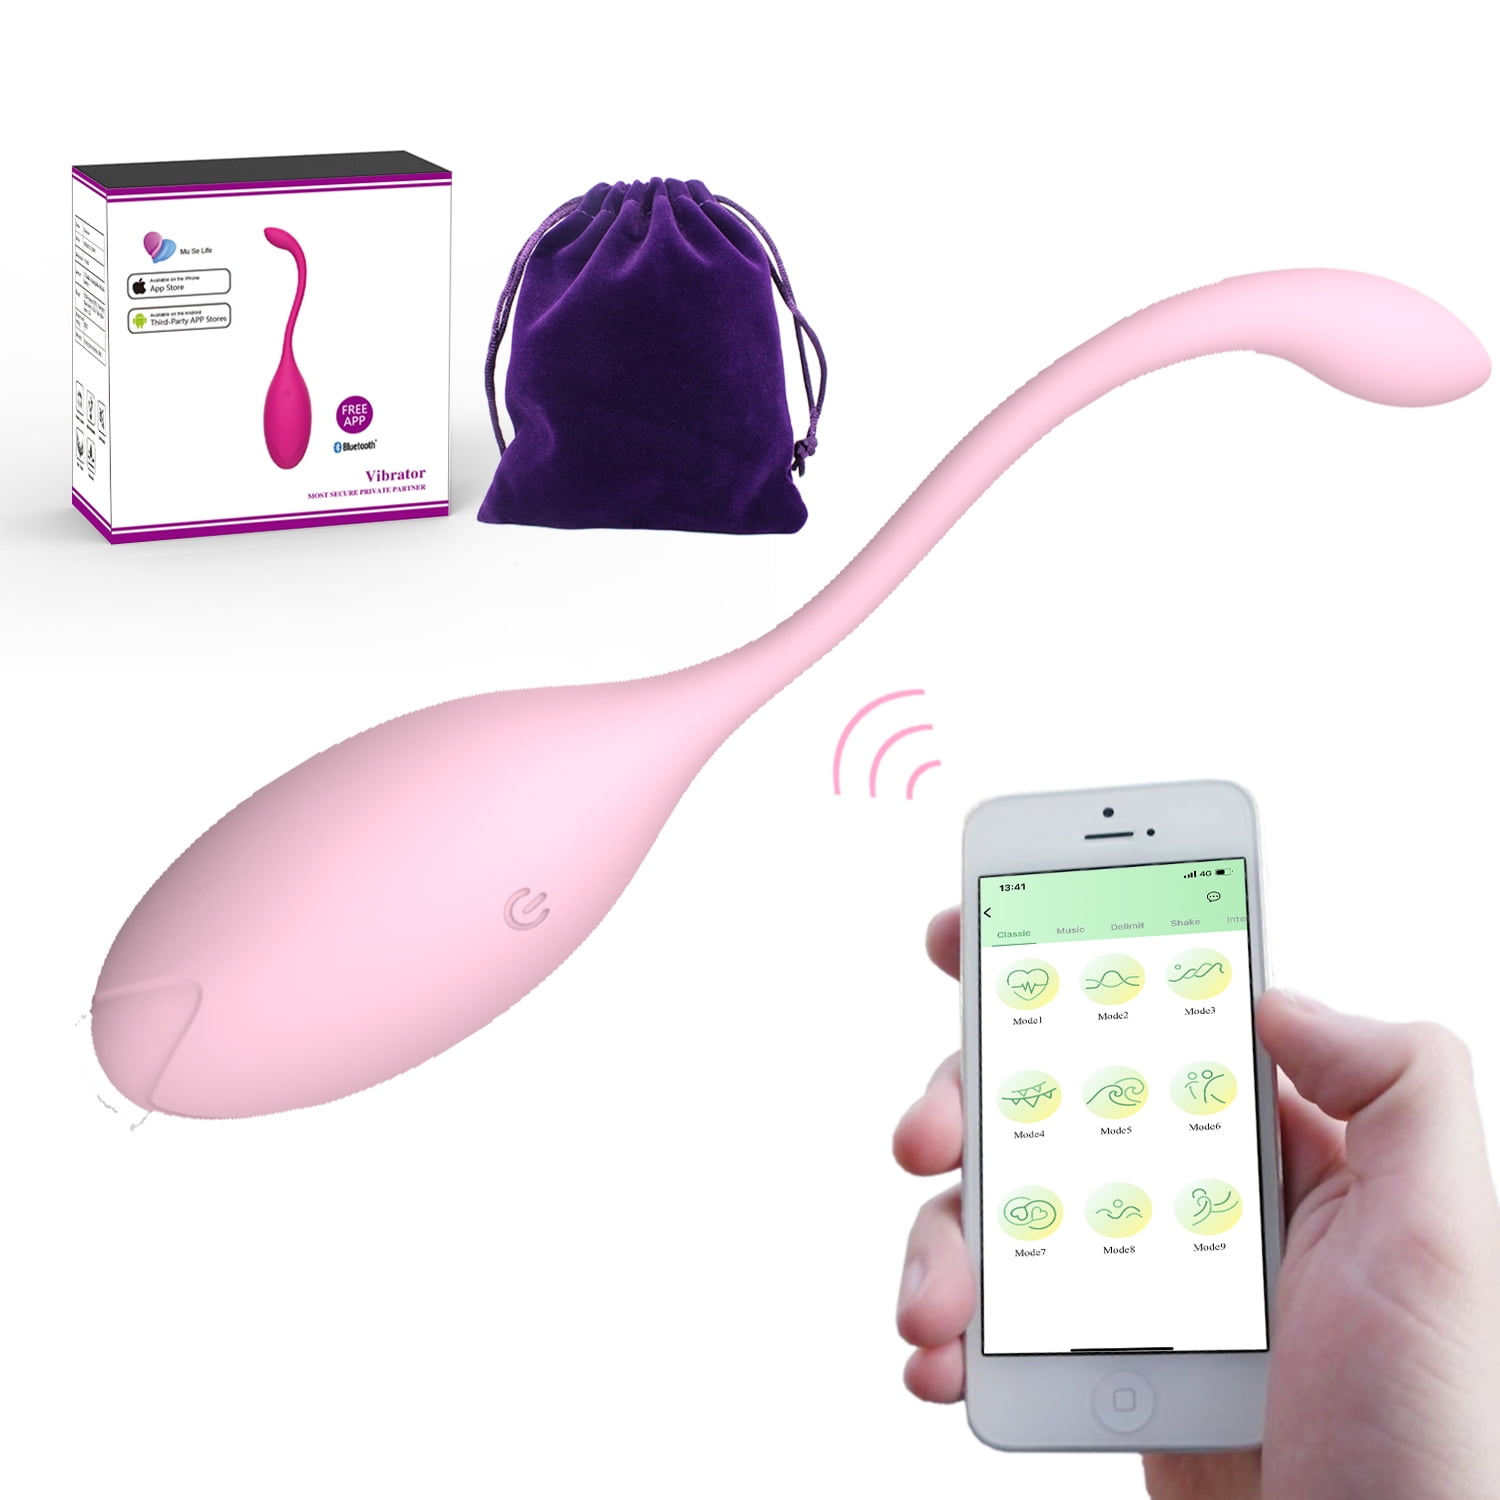 FIEWESEY Wireless Remote Control G-spot Massager App Vibrators Female Clitoral Stimulator Vibrating Egg Sex Toy for women Vaginal Ball (Light Pink)